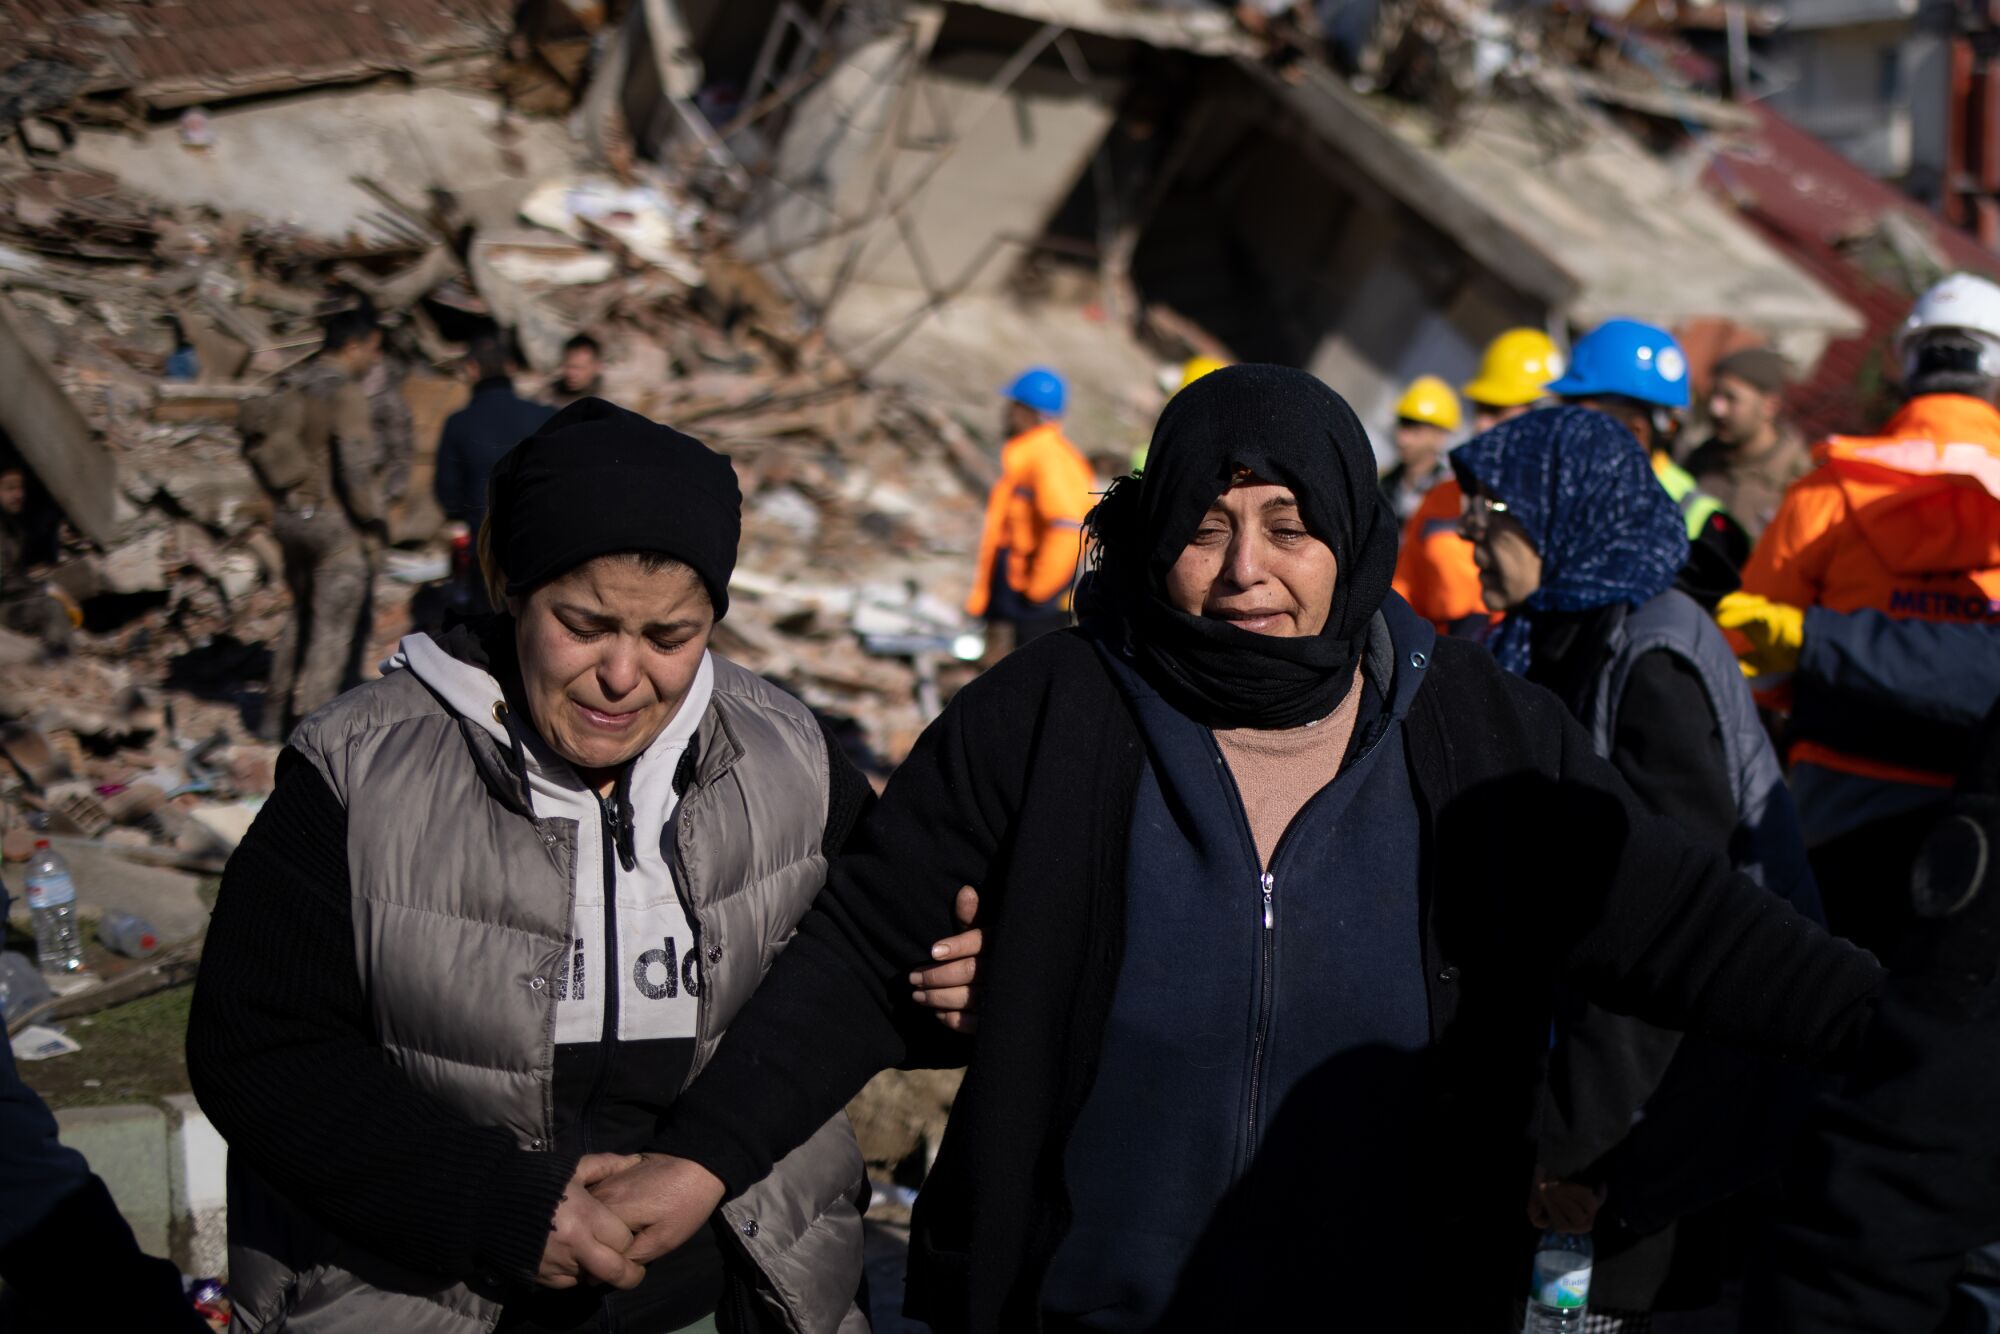 Women try to comfort each other as emergency services search through debris.